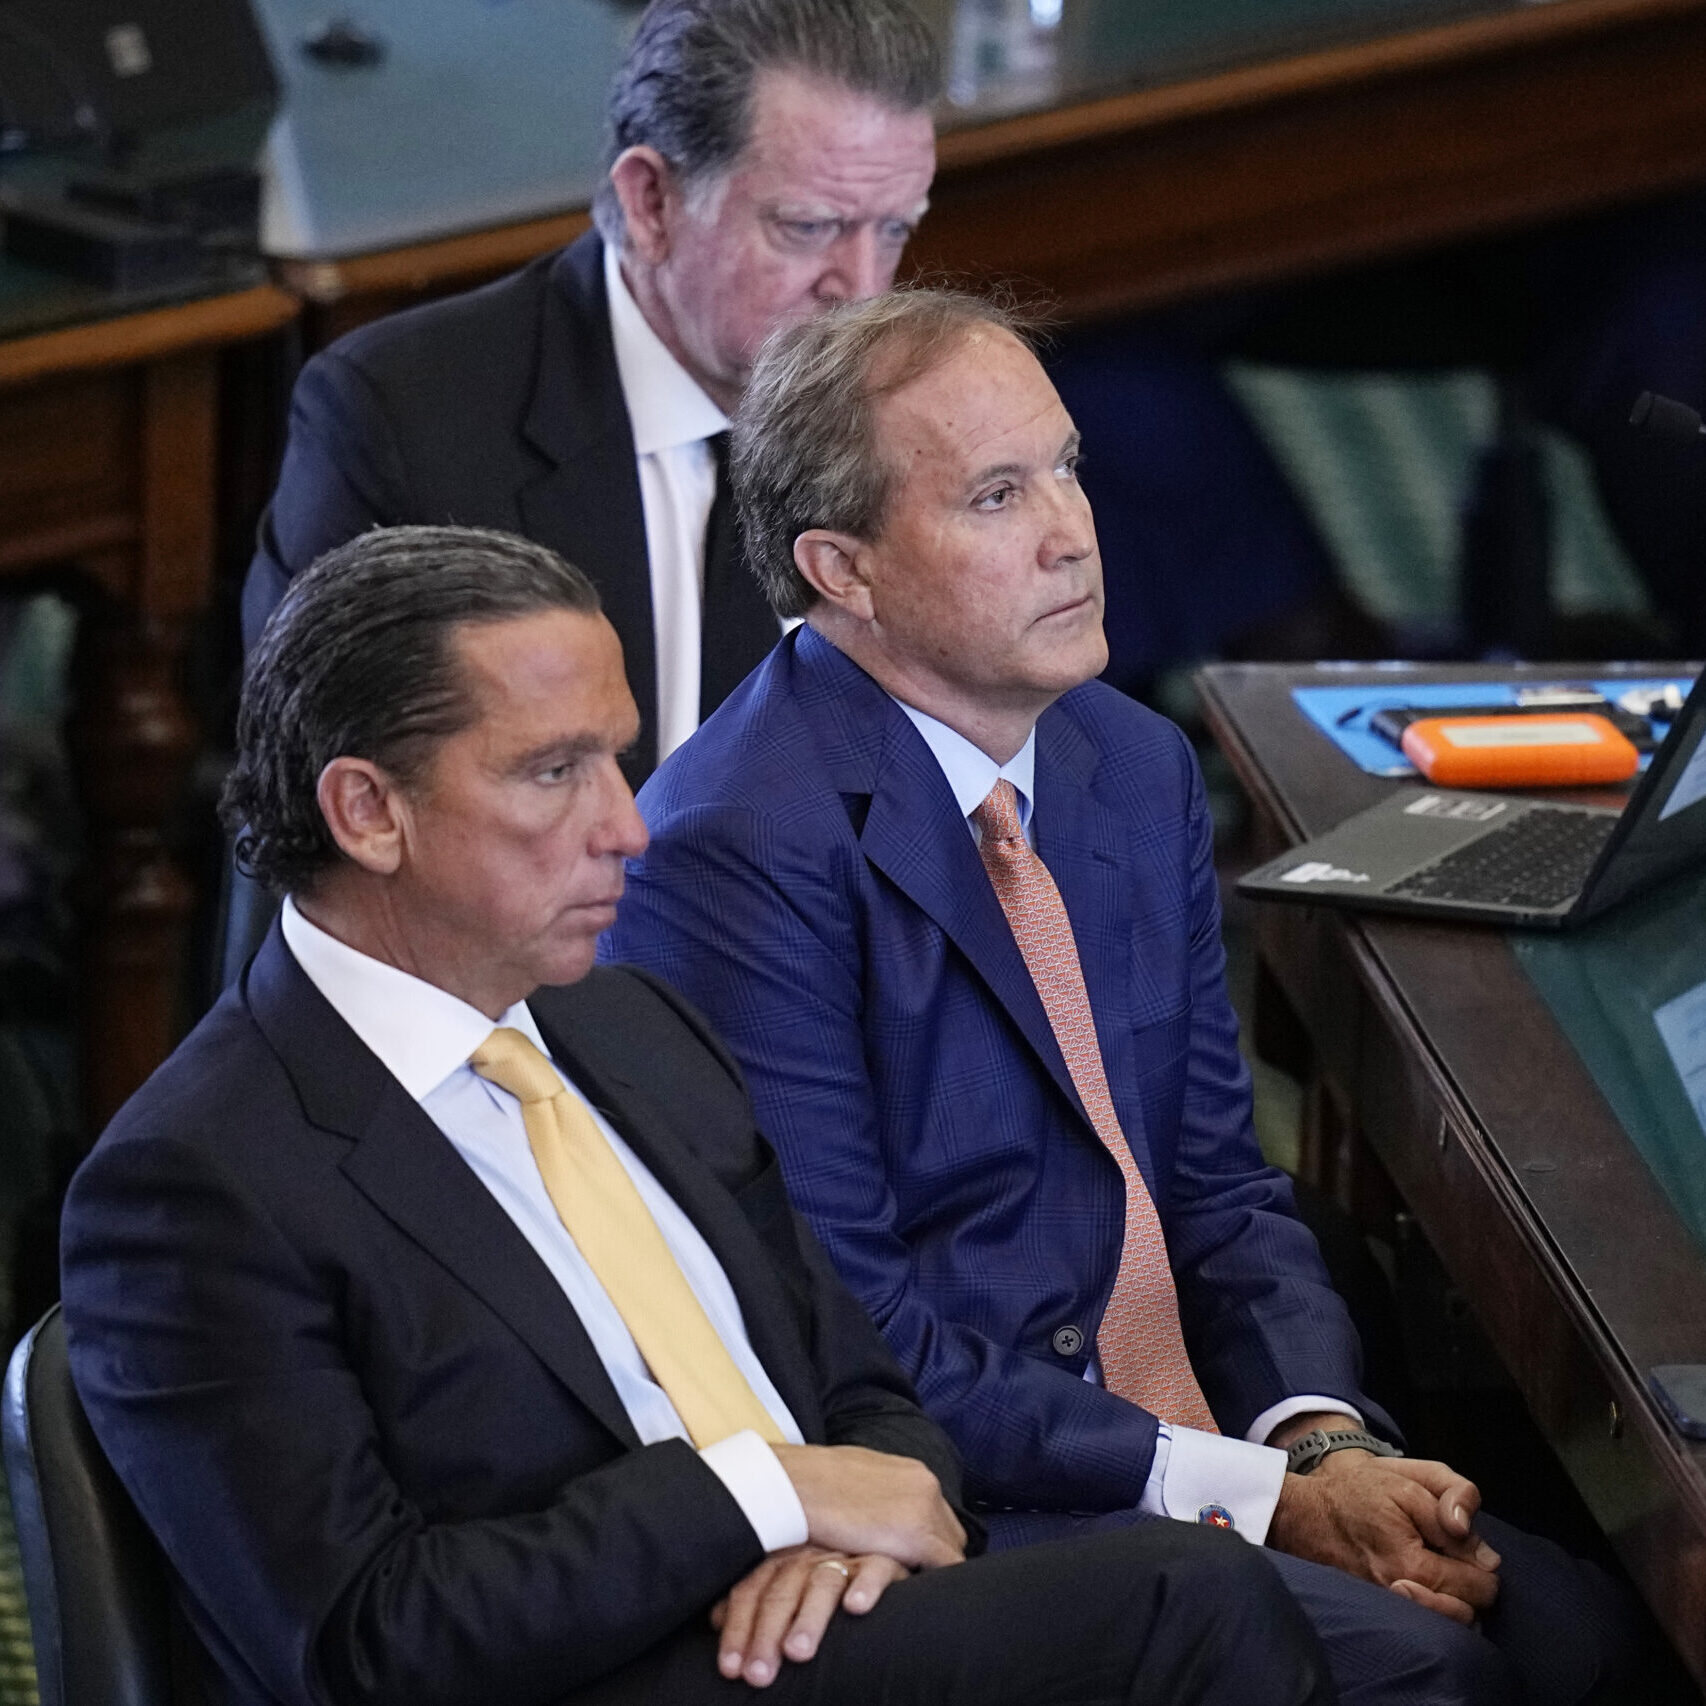 Texas state Attorney General Ken Paxton, center, sits between his attorneys Tony Buzbee, front, and Dan Cogdell, rear, as the articles of his impeachment are read during the his impeachment trial.